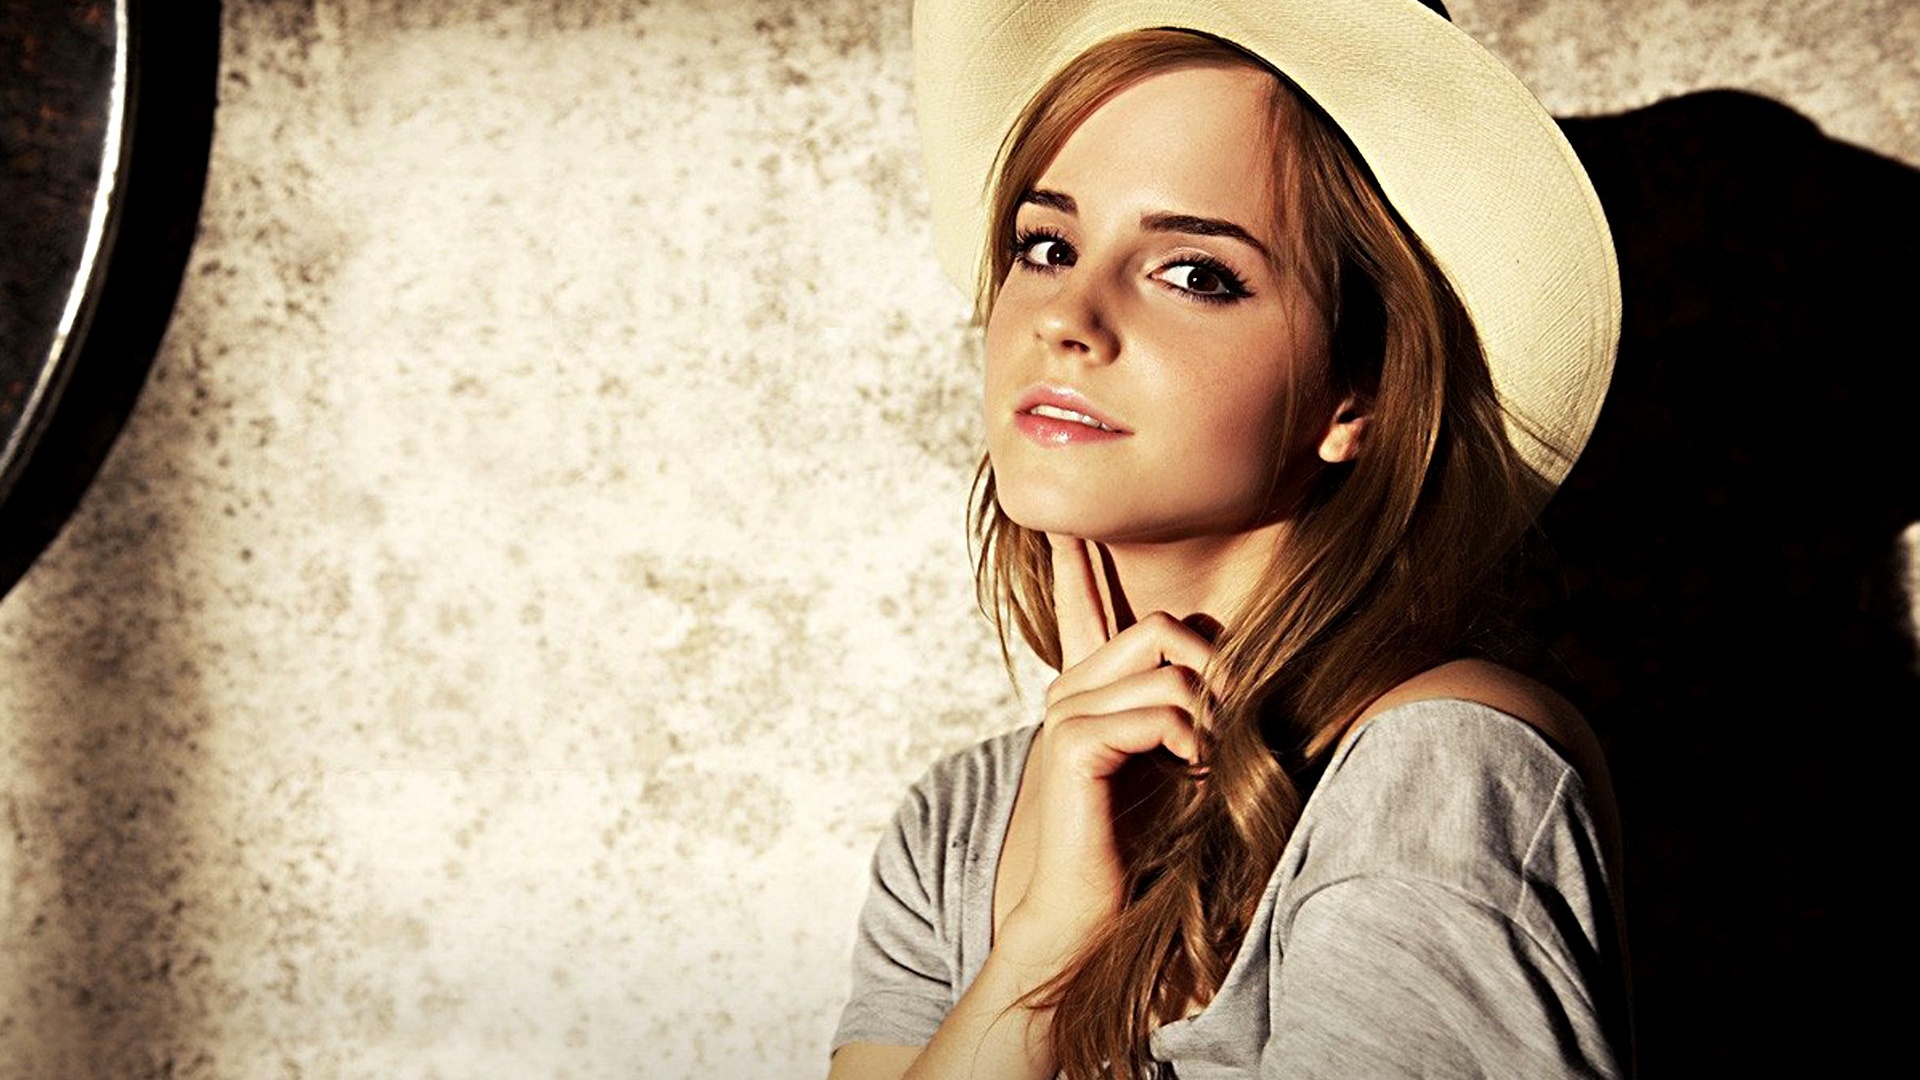 Emma Watson Desktop Computer Free Background Lovely Pose With Smile Images Hd